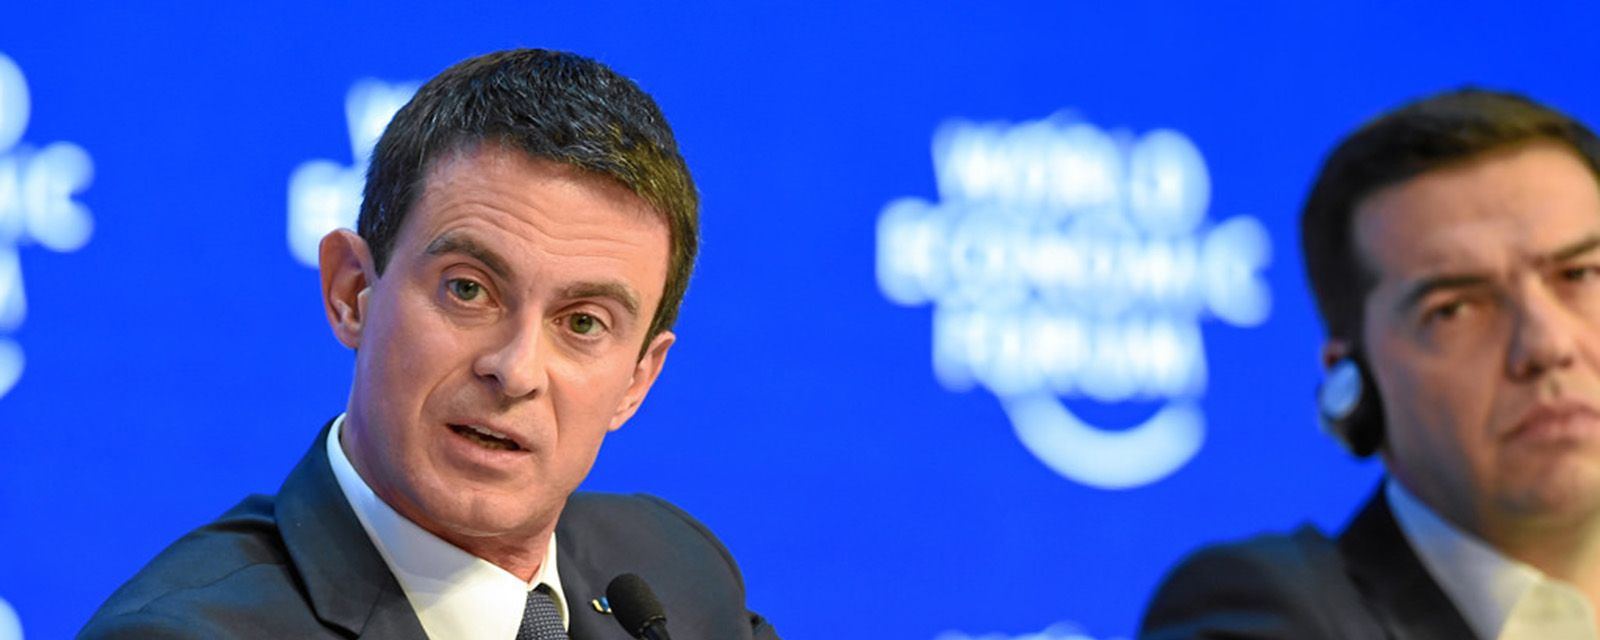 FORMER FRENCH PM: ATTACK ON KURDS IS ATTACK ON EUROPE